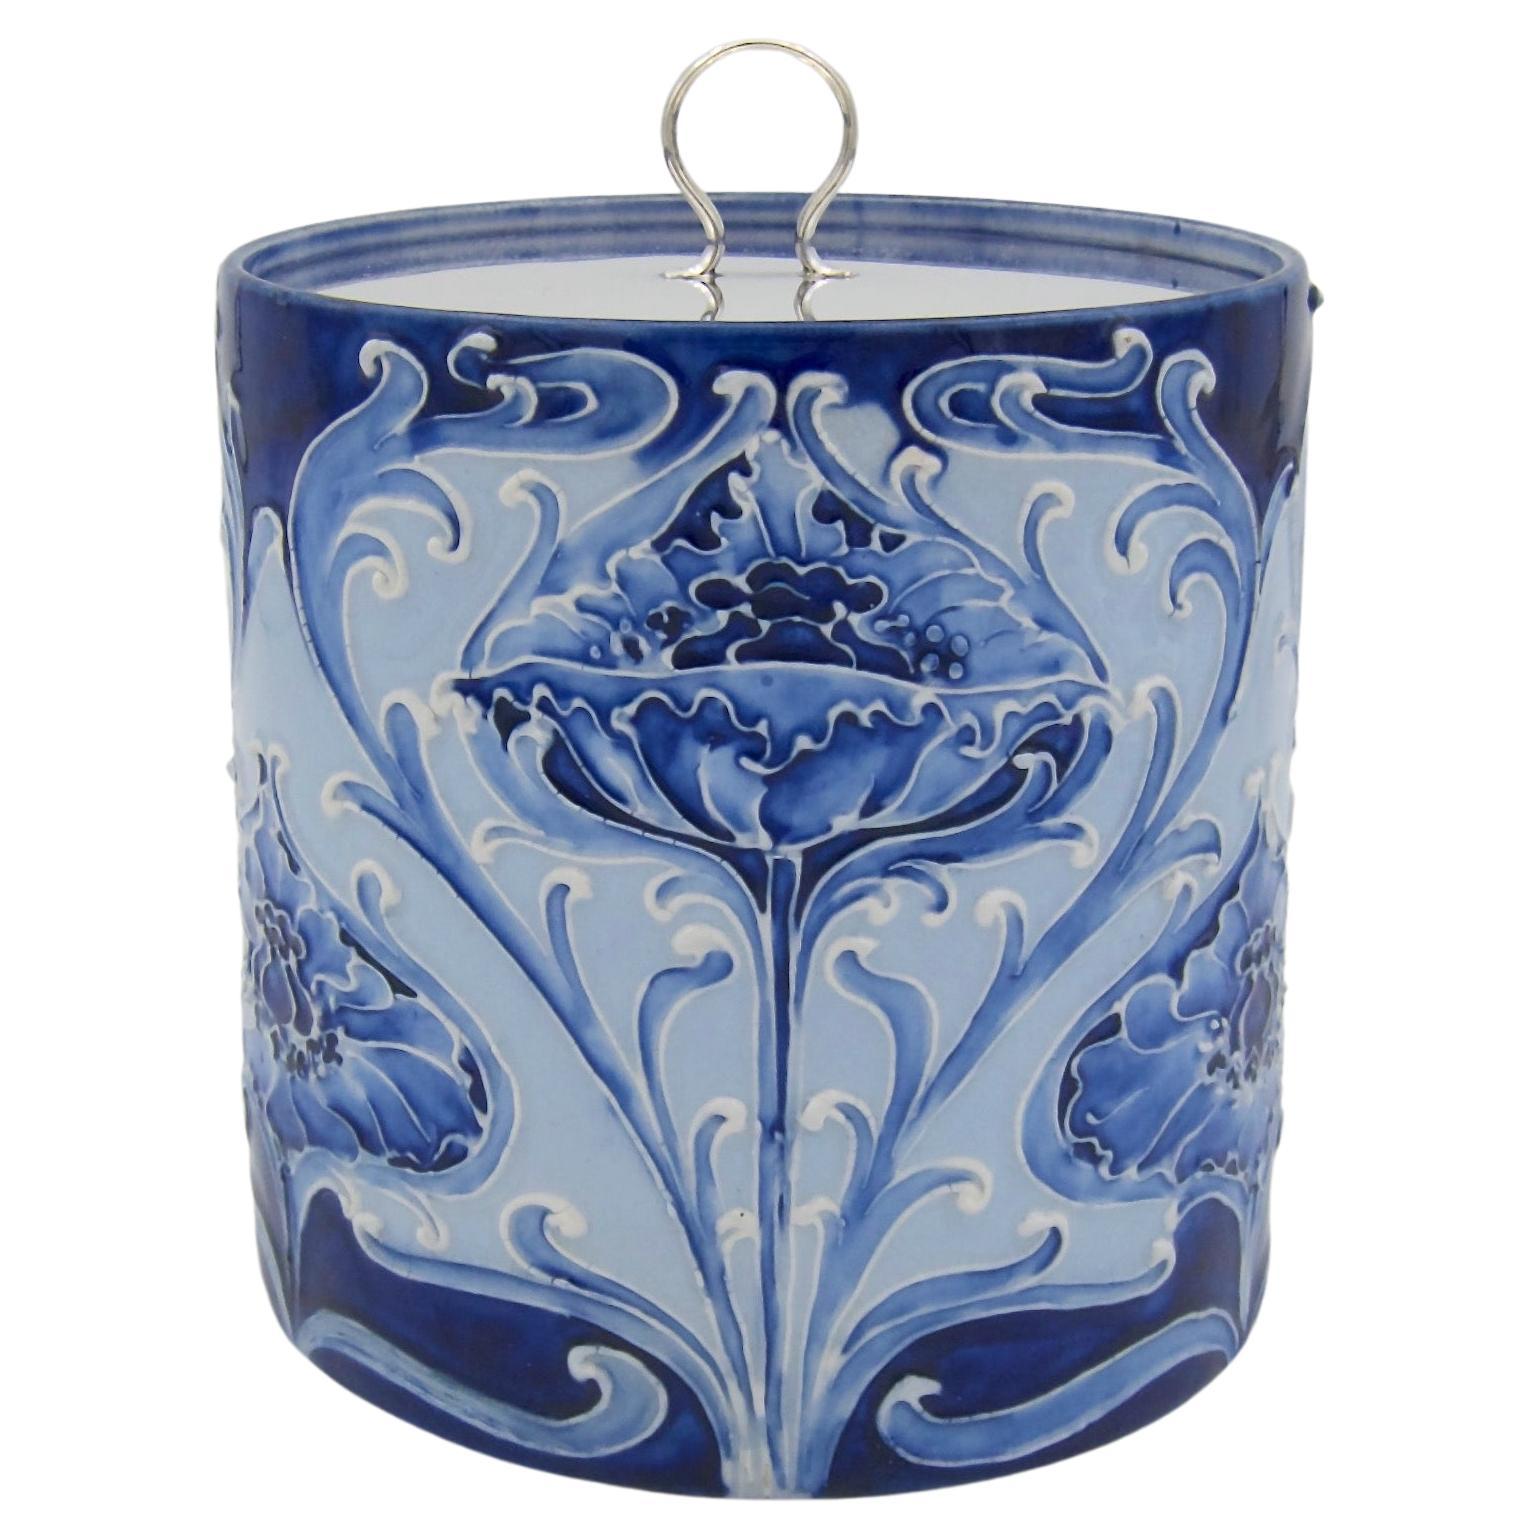 A signed William Moorcroft Florian ware art pottery biscuit barrel with stylized floral decoration in shades of blue and a silver-plated lid. The canister was made in England for James Macintyre & Co., Ltd. of Washington Works, Stoke-on-Trent,